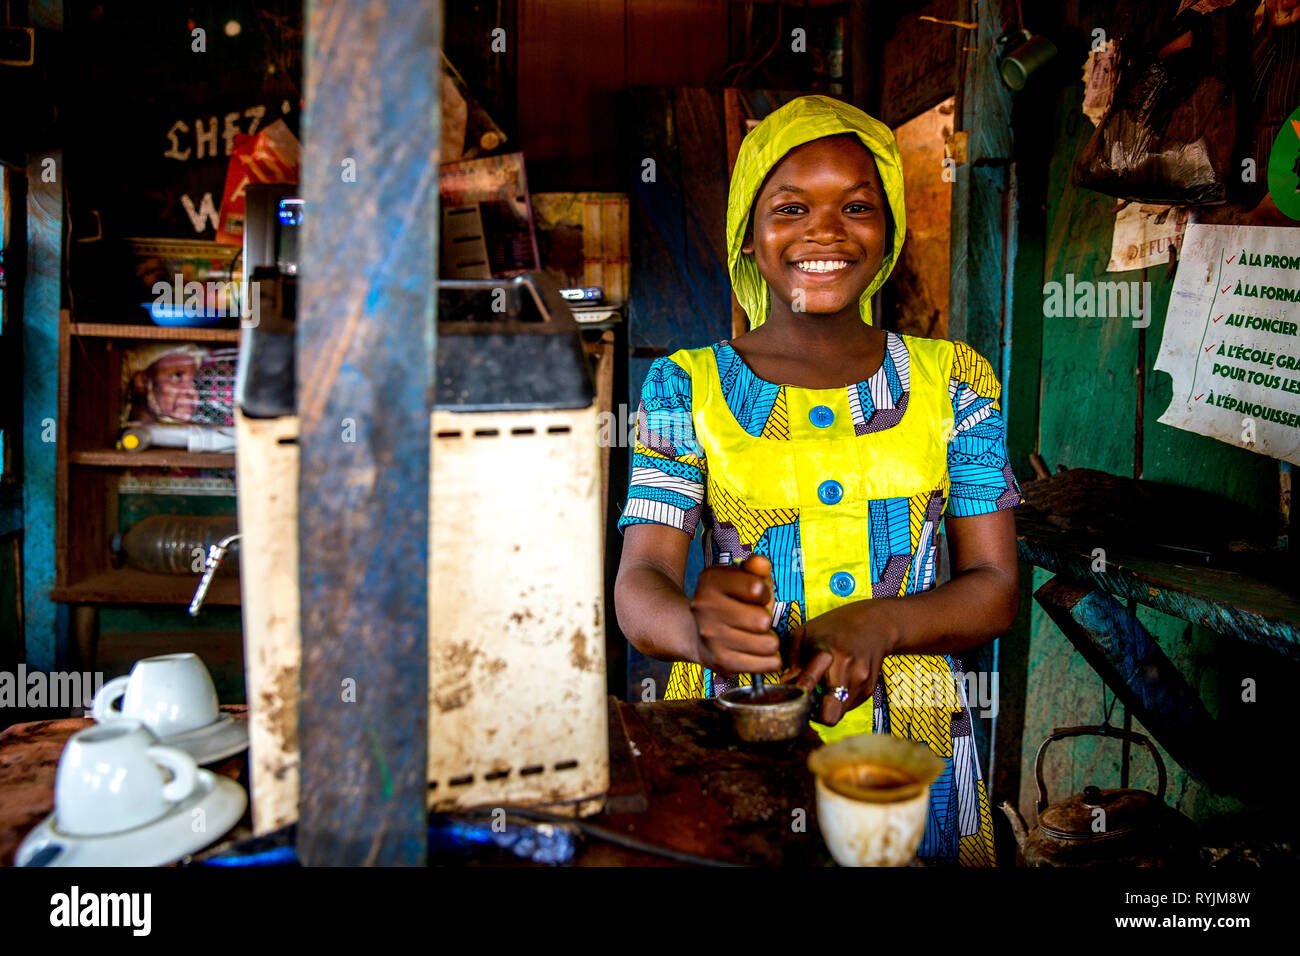 Smiling muslim girl working in a cafÃ© near Agboville, Ivory Coast. Stock Photo